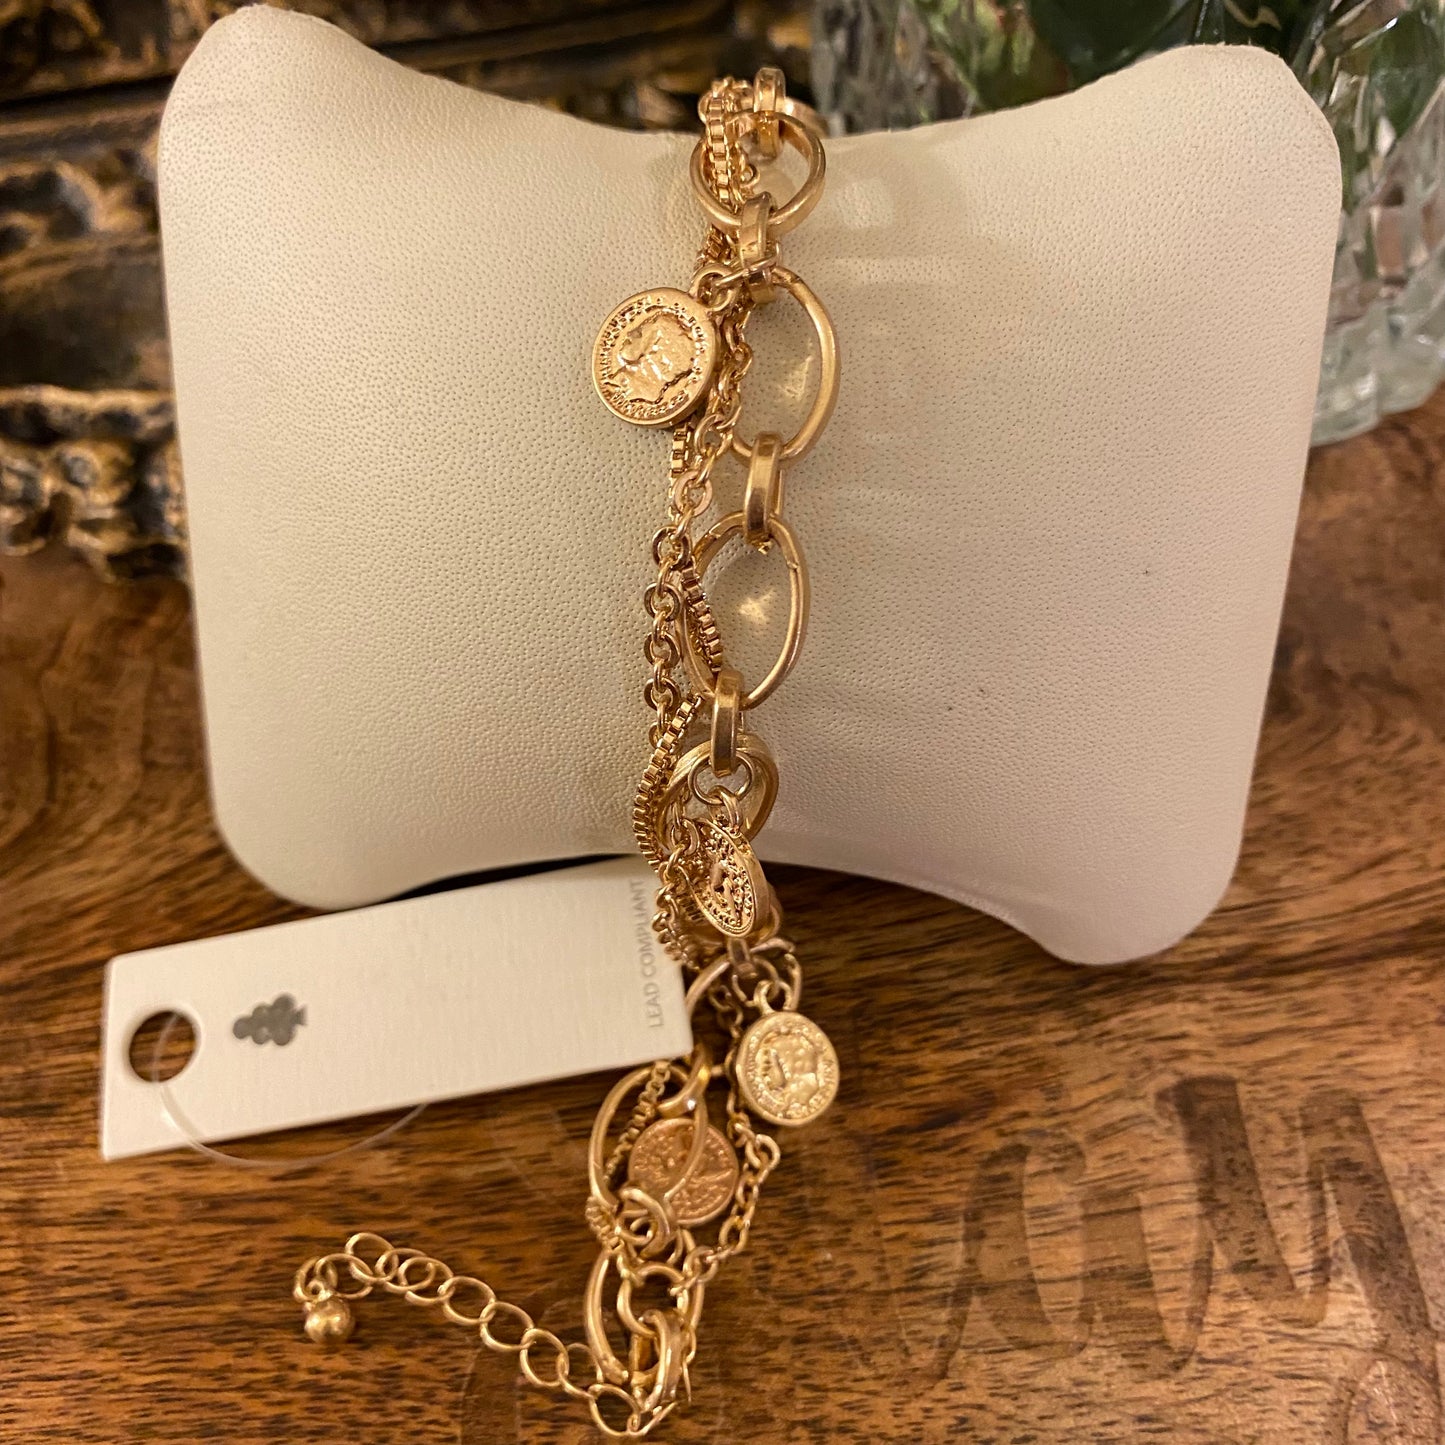 Worn Gold Bracelet 7.5” plus 2” extender with Claw Closure